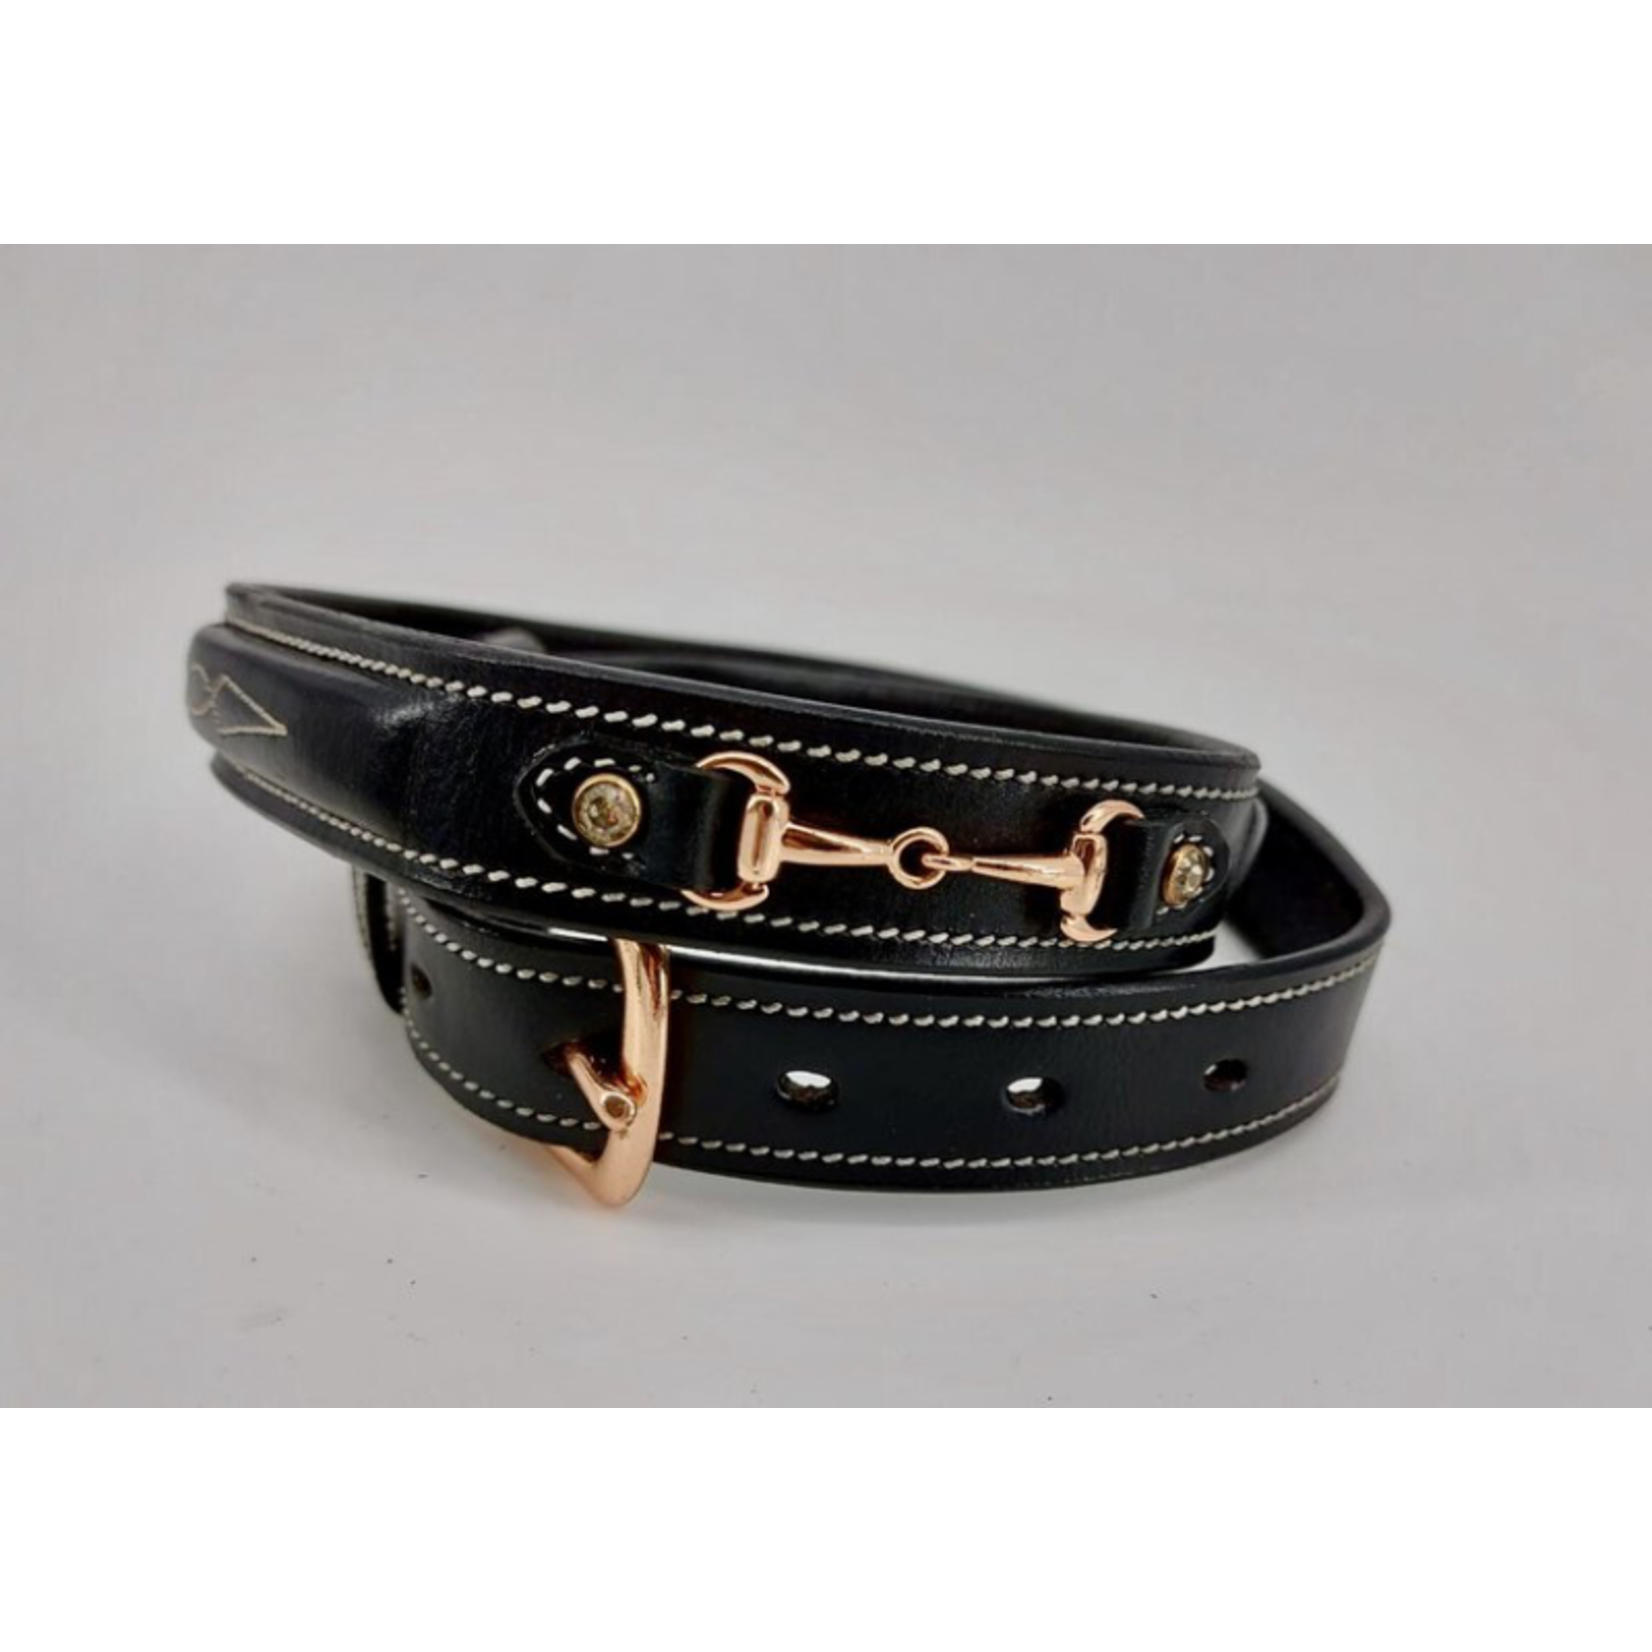 Horses and Lifestyle Equestrian style belts